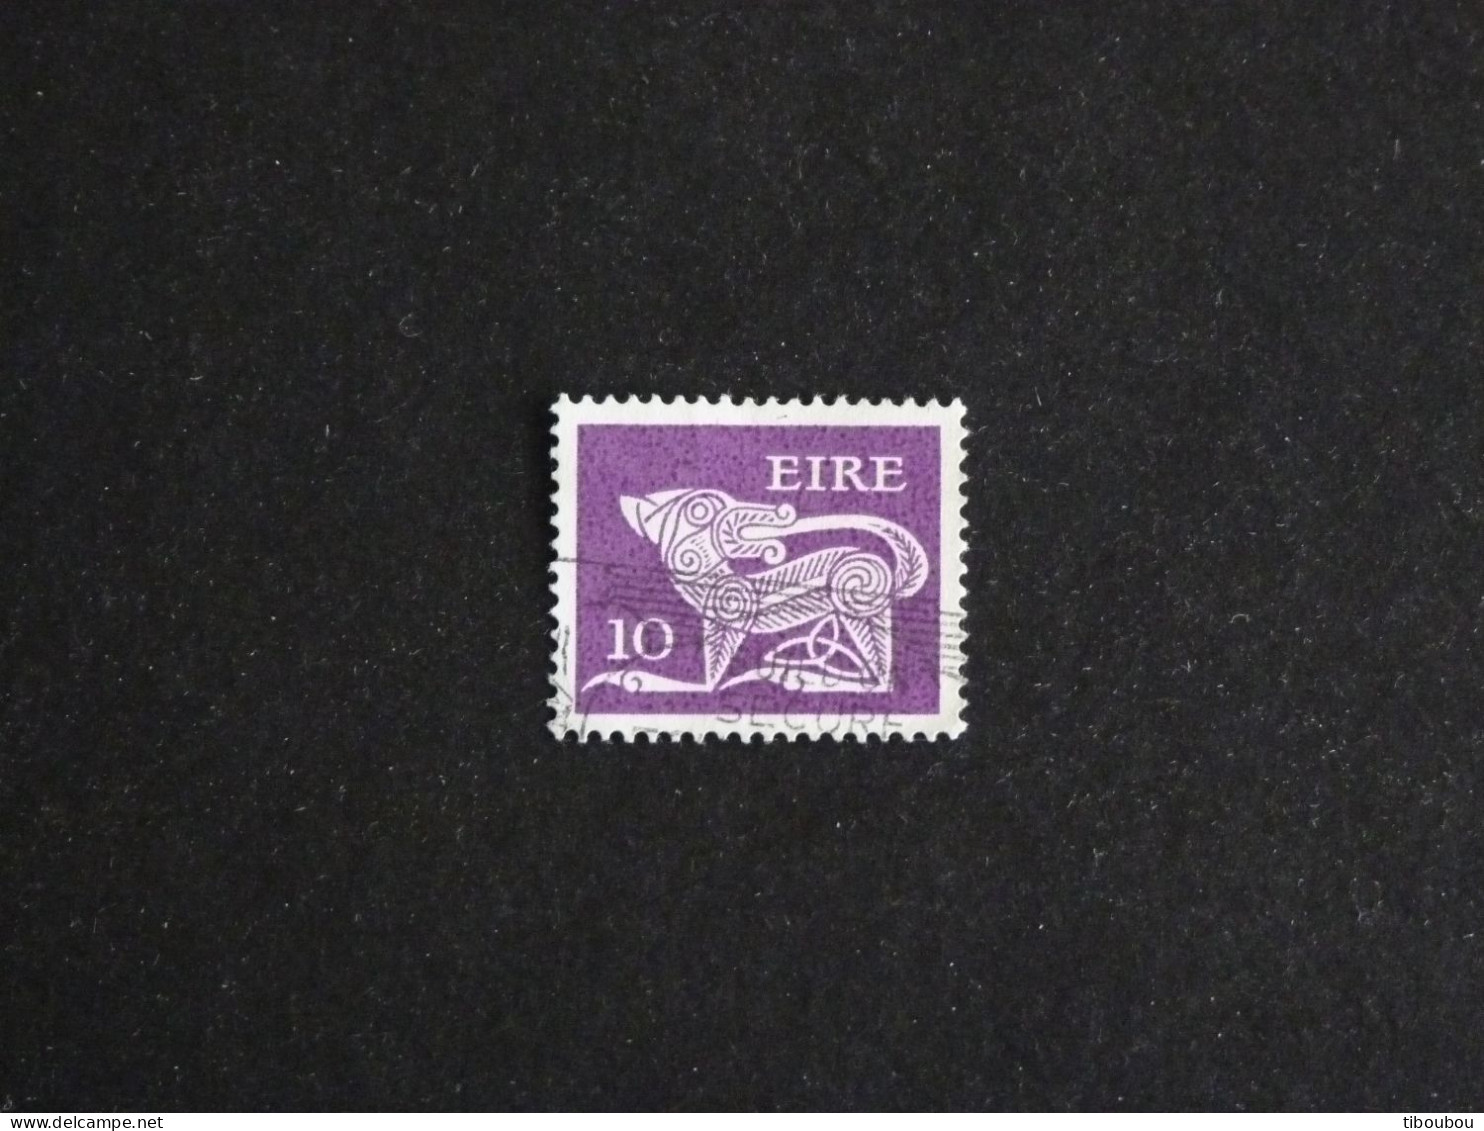 IRLANDE IRELAND EIRE YT 360 OBLITERE - CHIEN STYLISE BROCHE ANCIENNE - Used Stamps